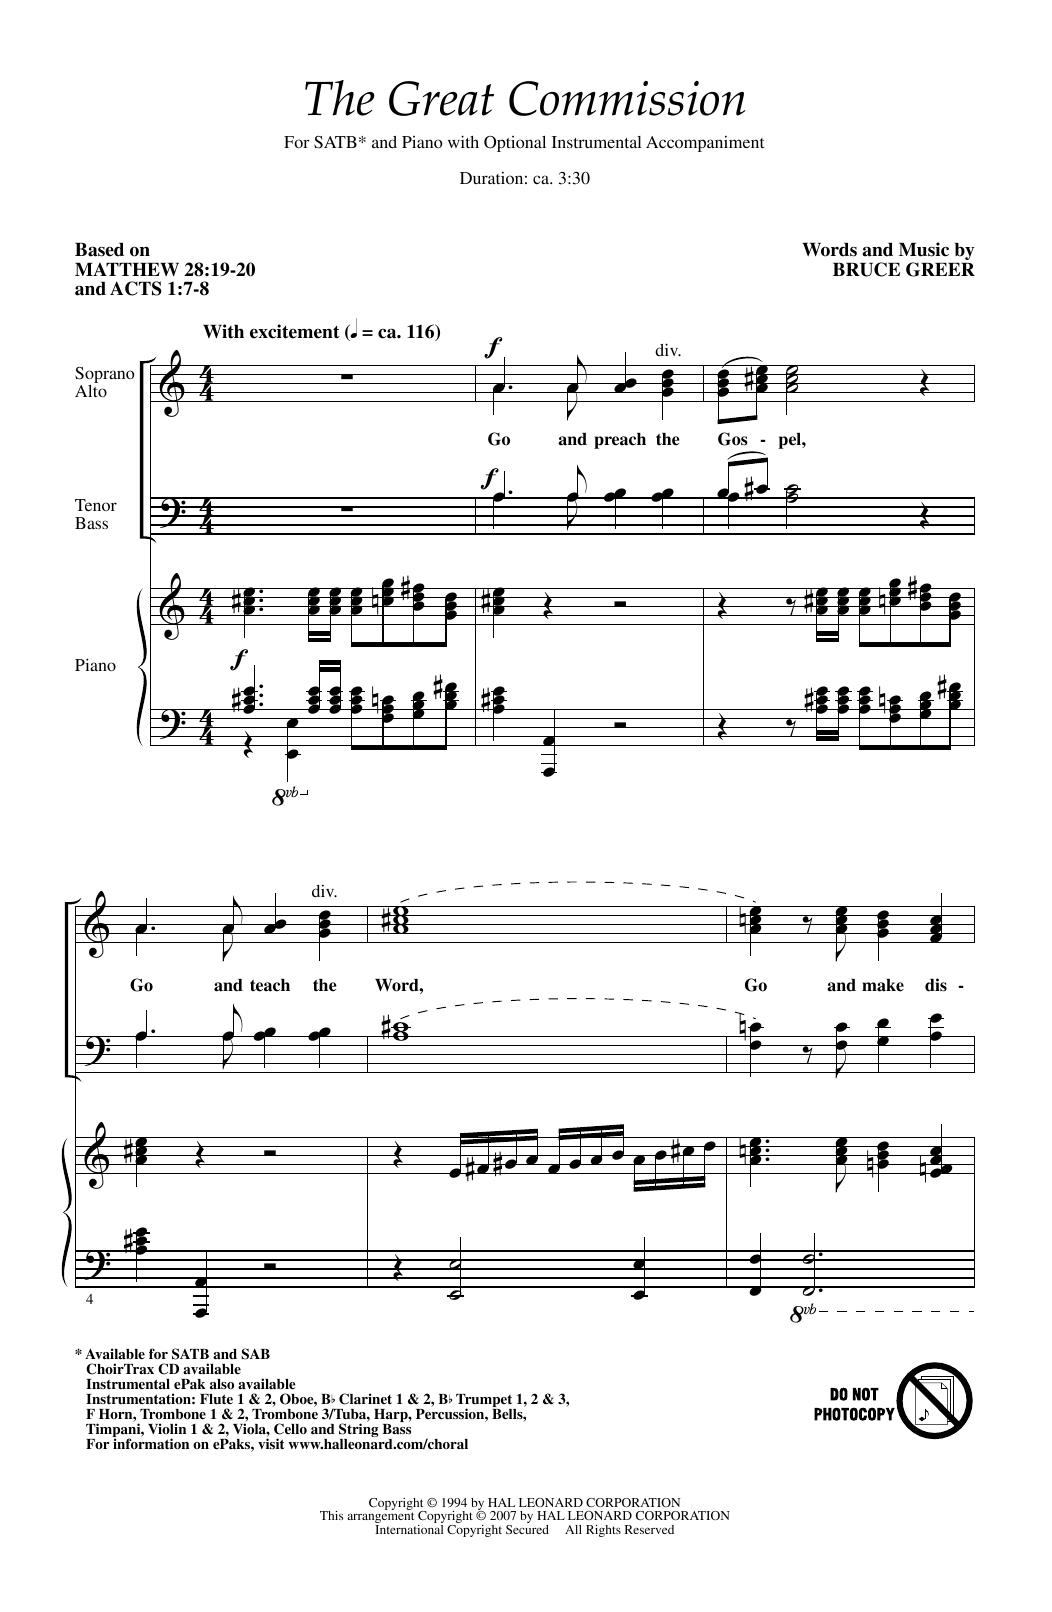 Download Bruce Greer The Great Commission Sheet Music